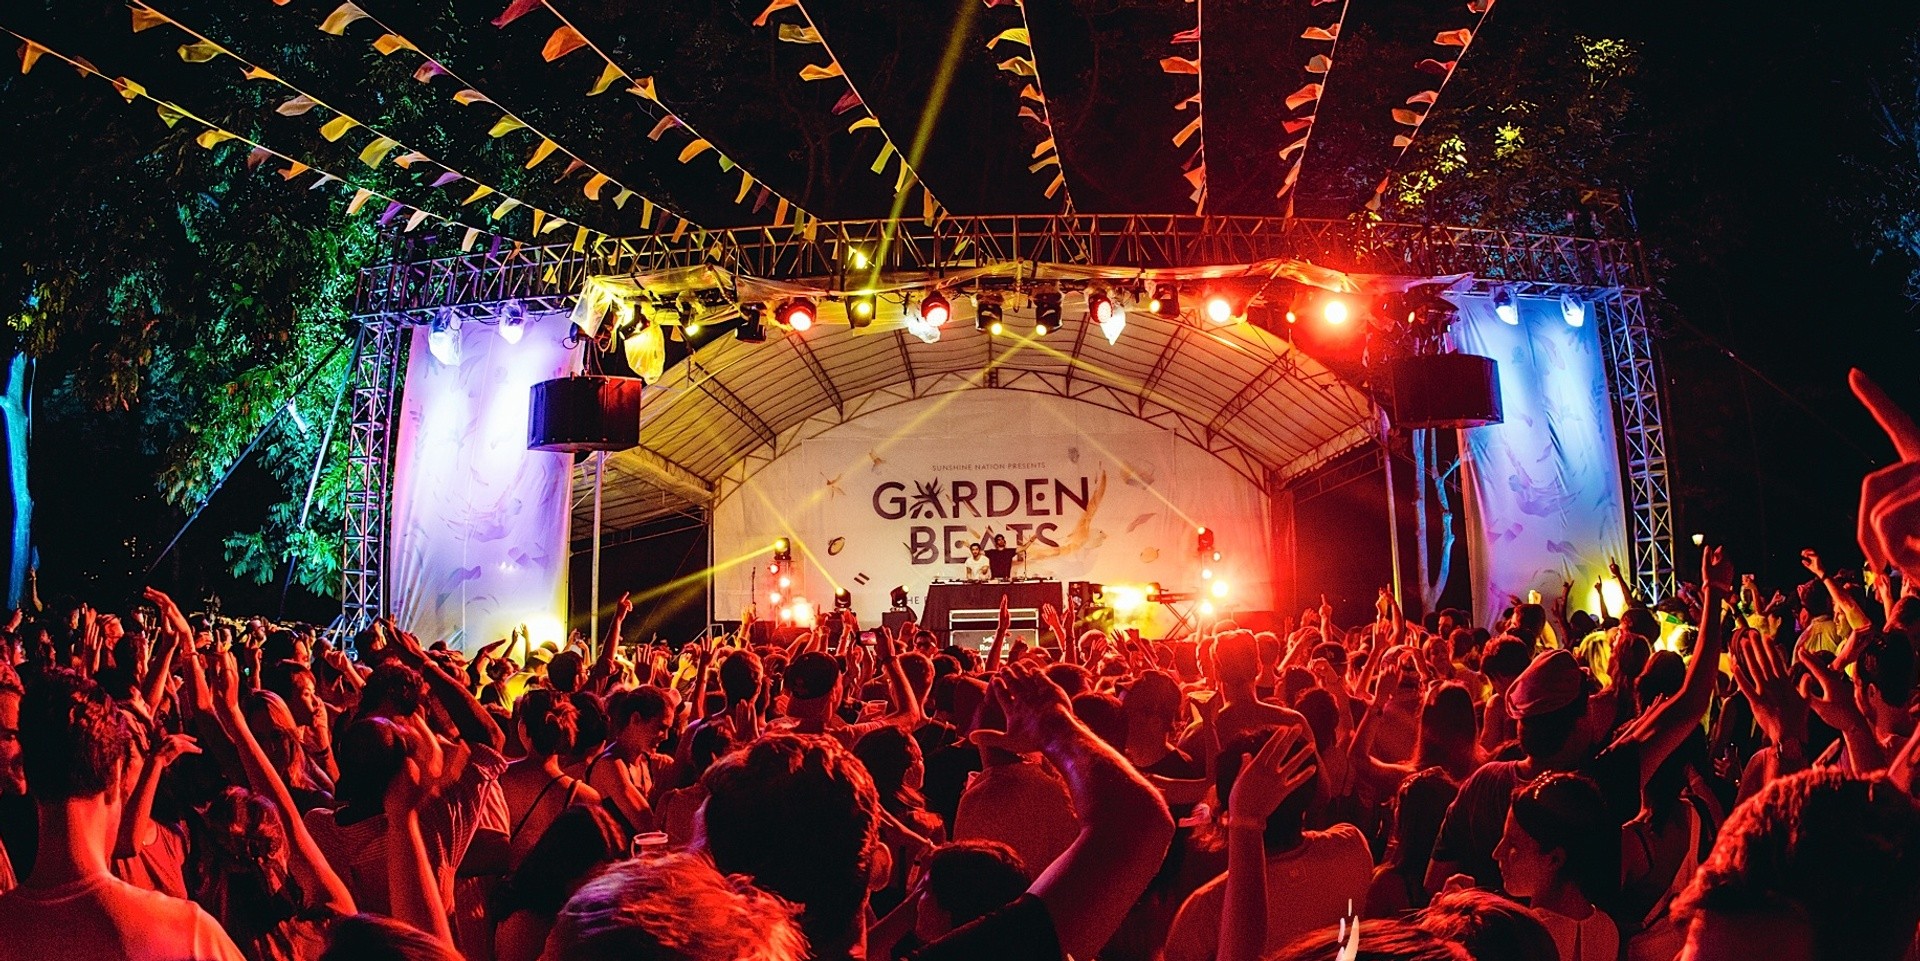 Garden Beats, the chillest electronic music picnic in Singapore, returns in 2017